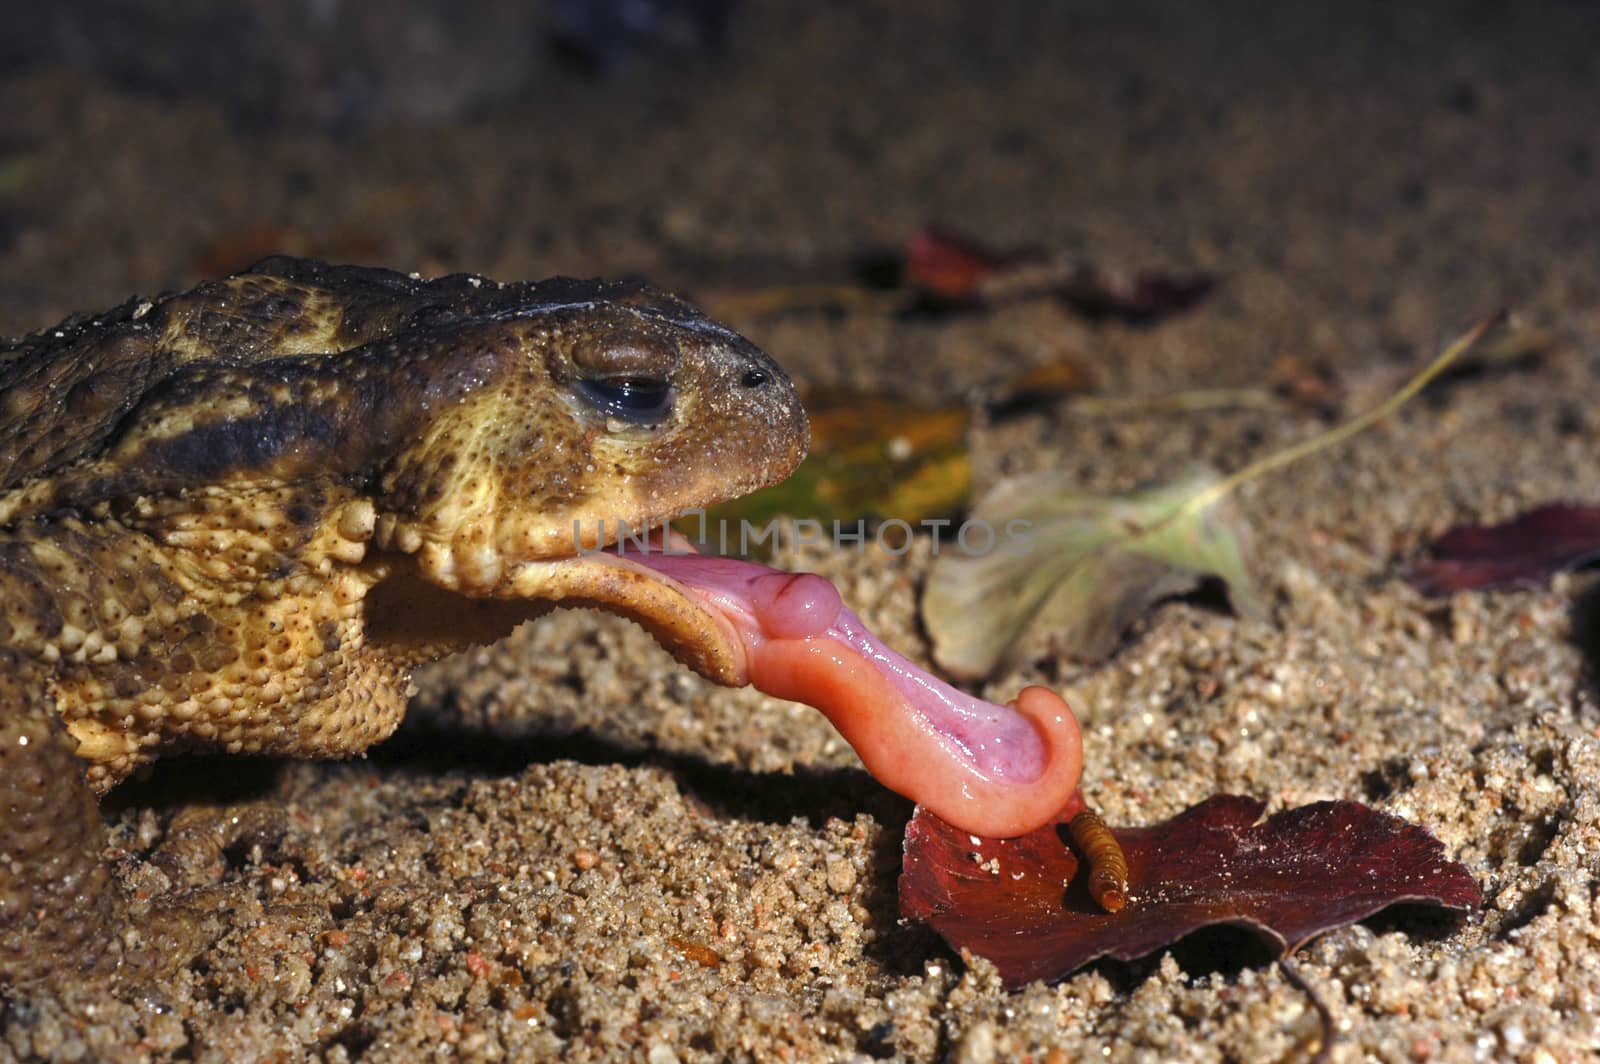 common toad, bufo bufo, Eating a worm, tongue out